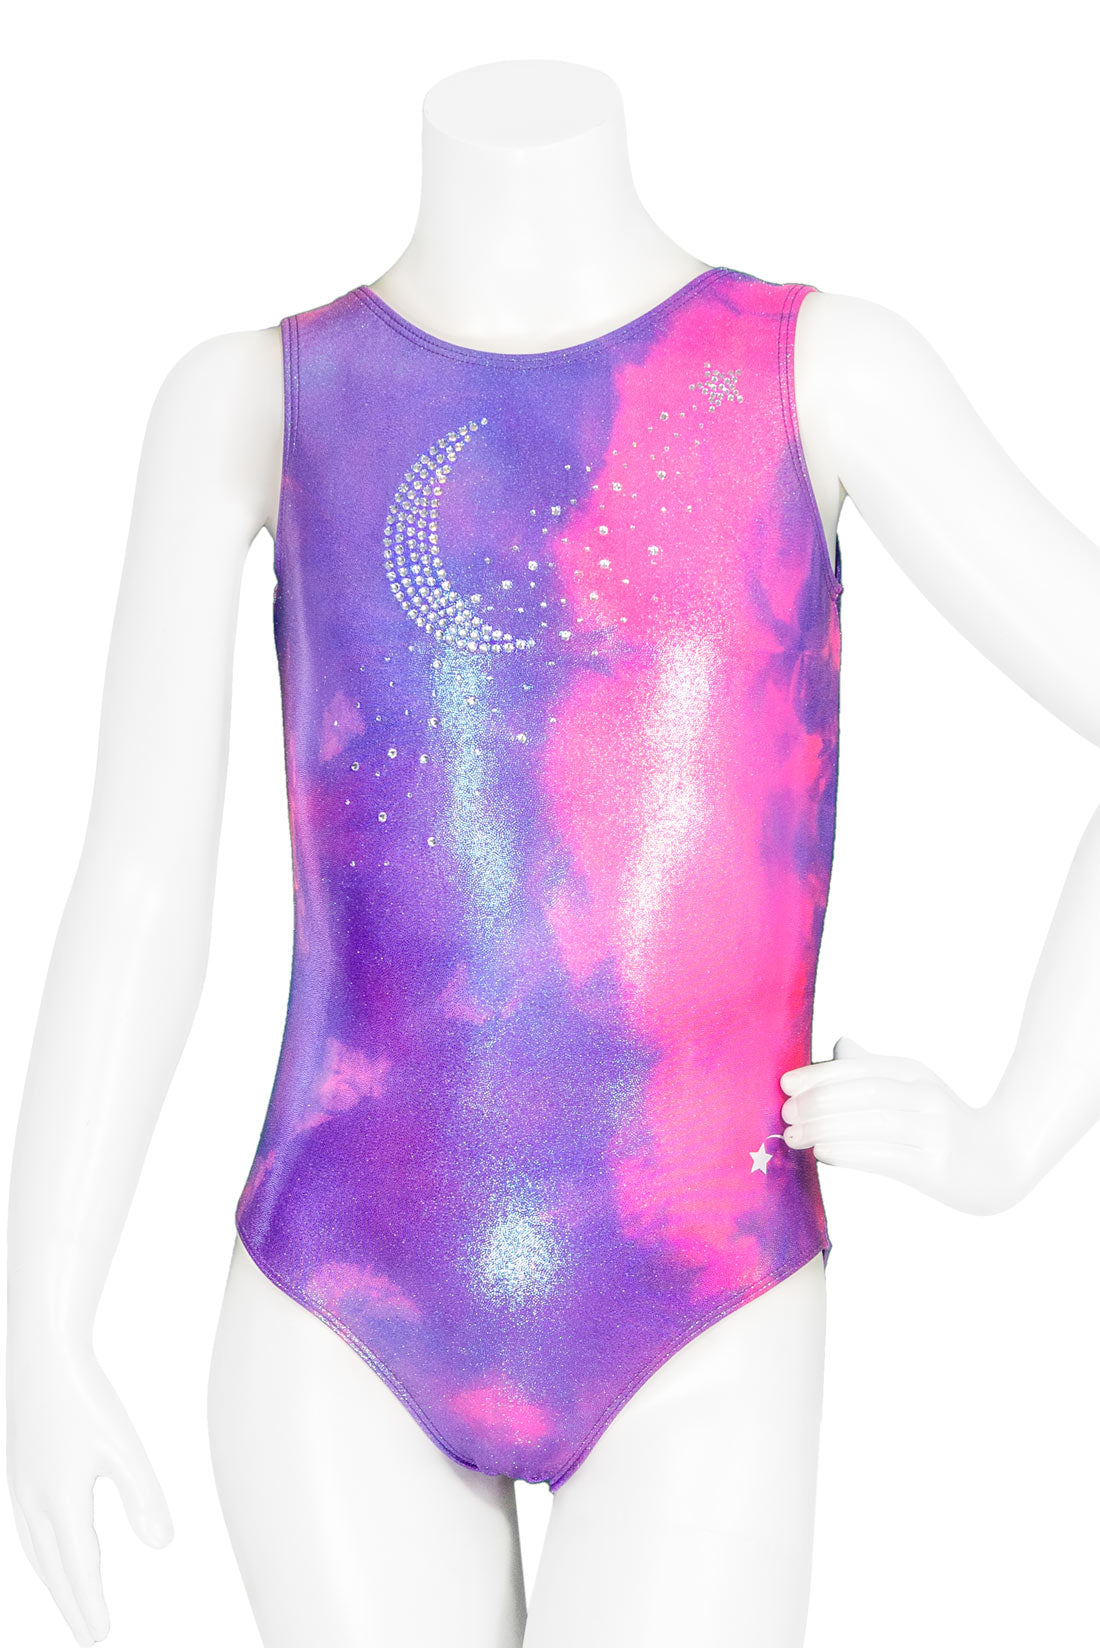 Pink and purple cloud tie dye gymnastic leotard with a crystal moon and star embellishment by Destira, 2023